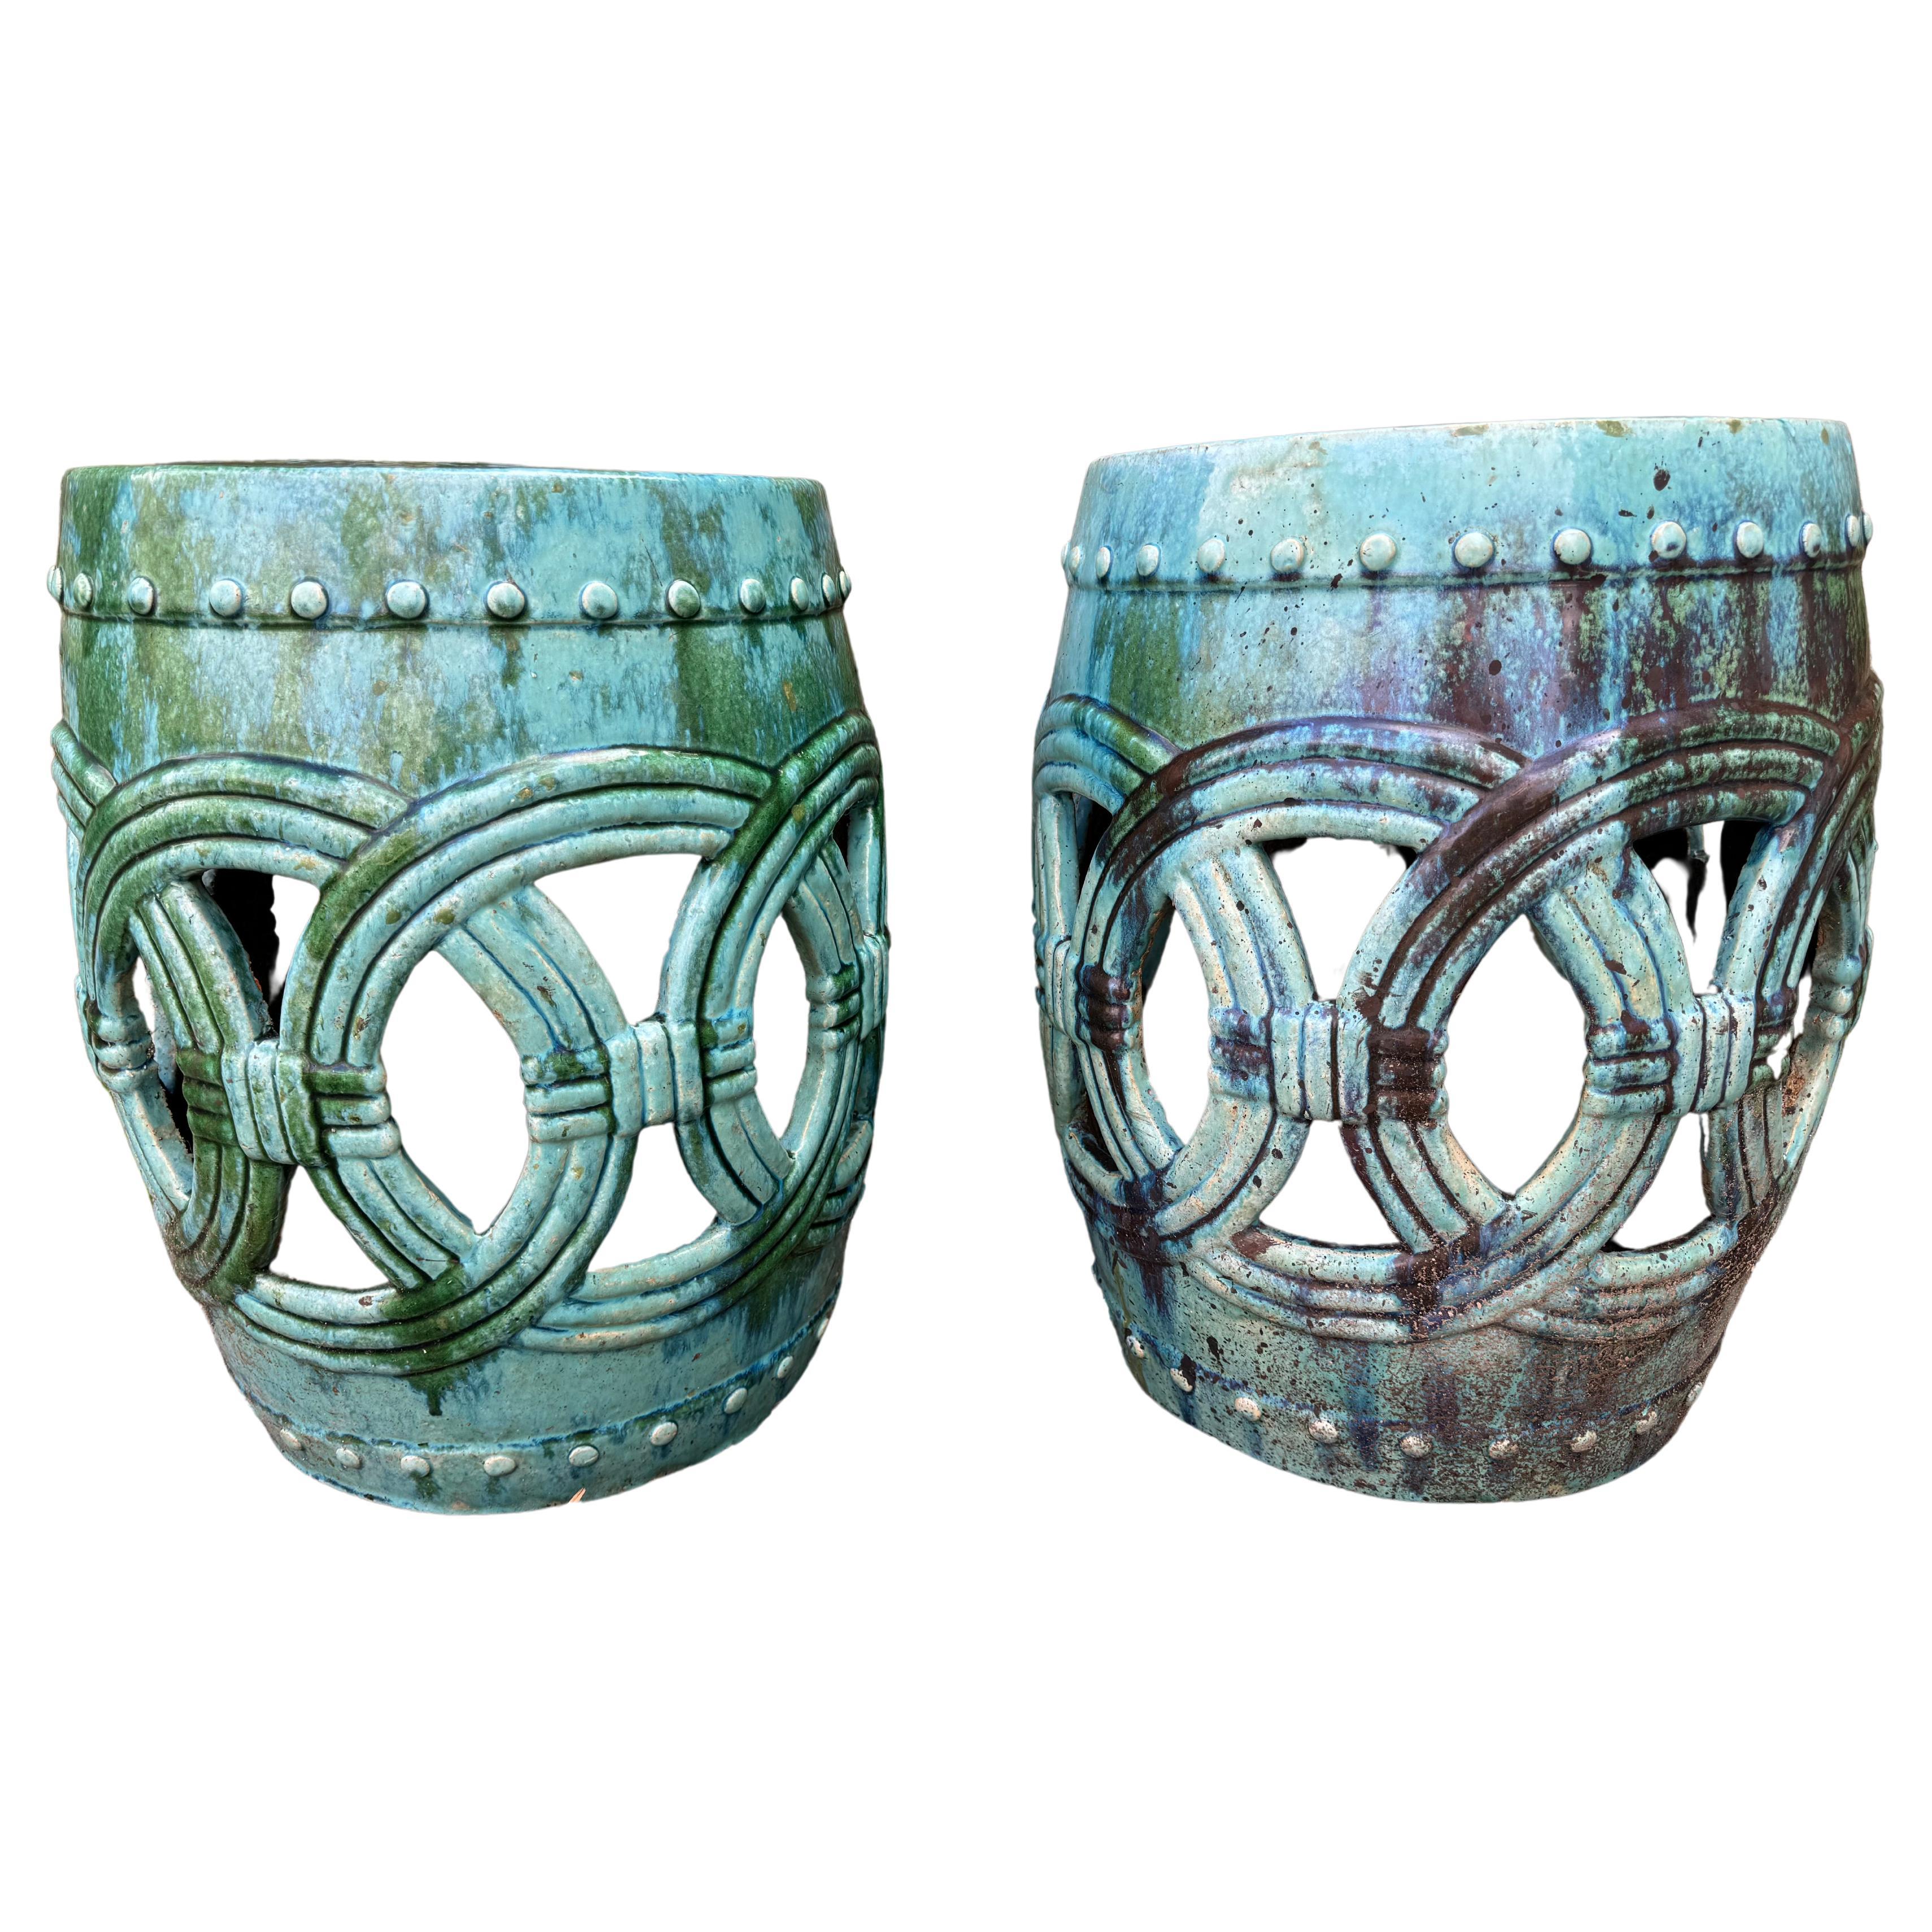 Pair of Turquoise Glazed Reticulated Garden Seats End Tables For Sale